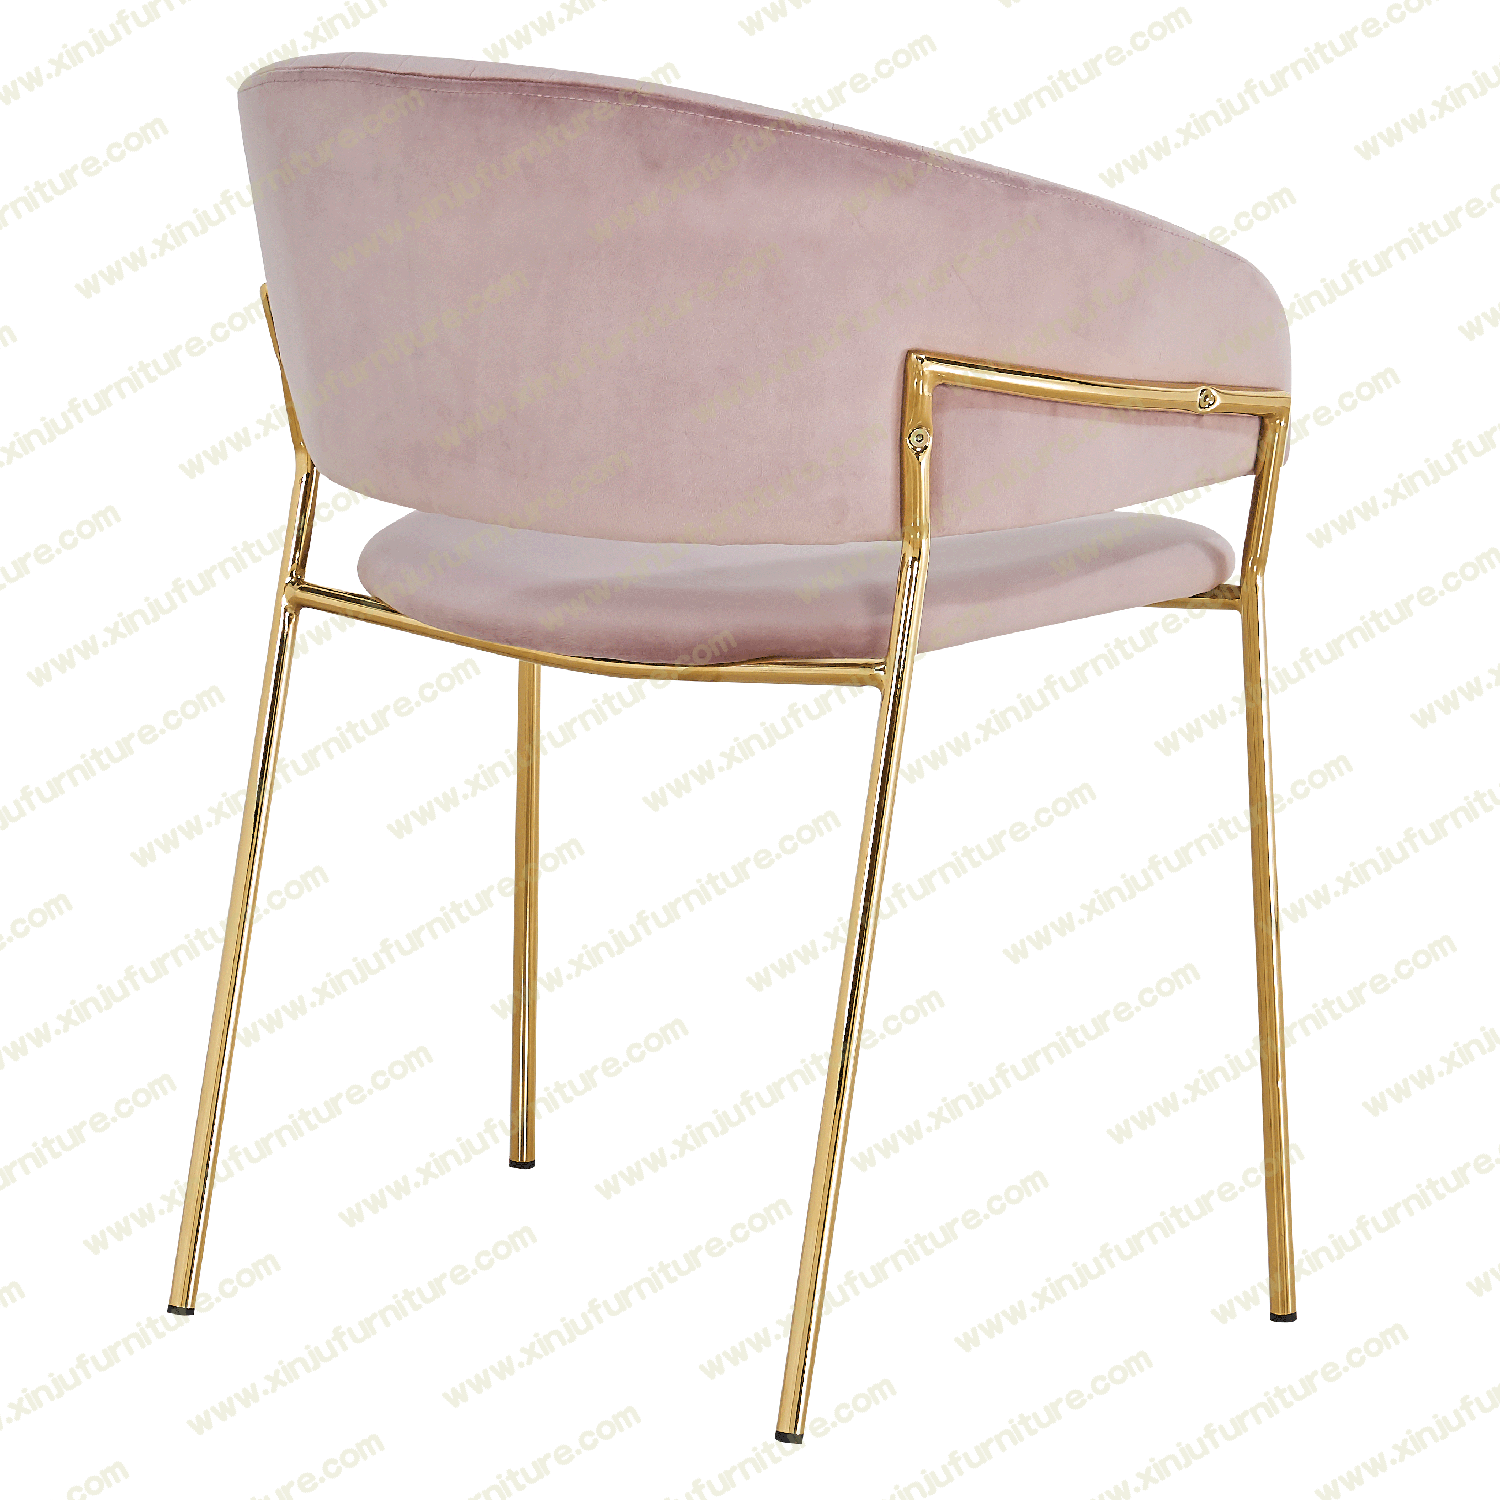 Simple modern pink dining chair